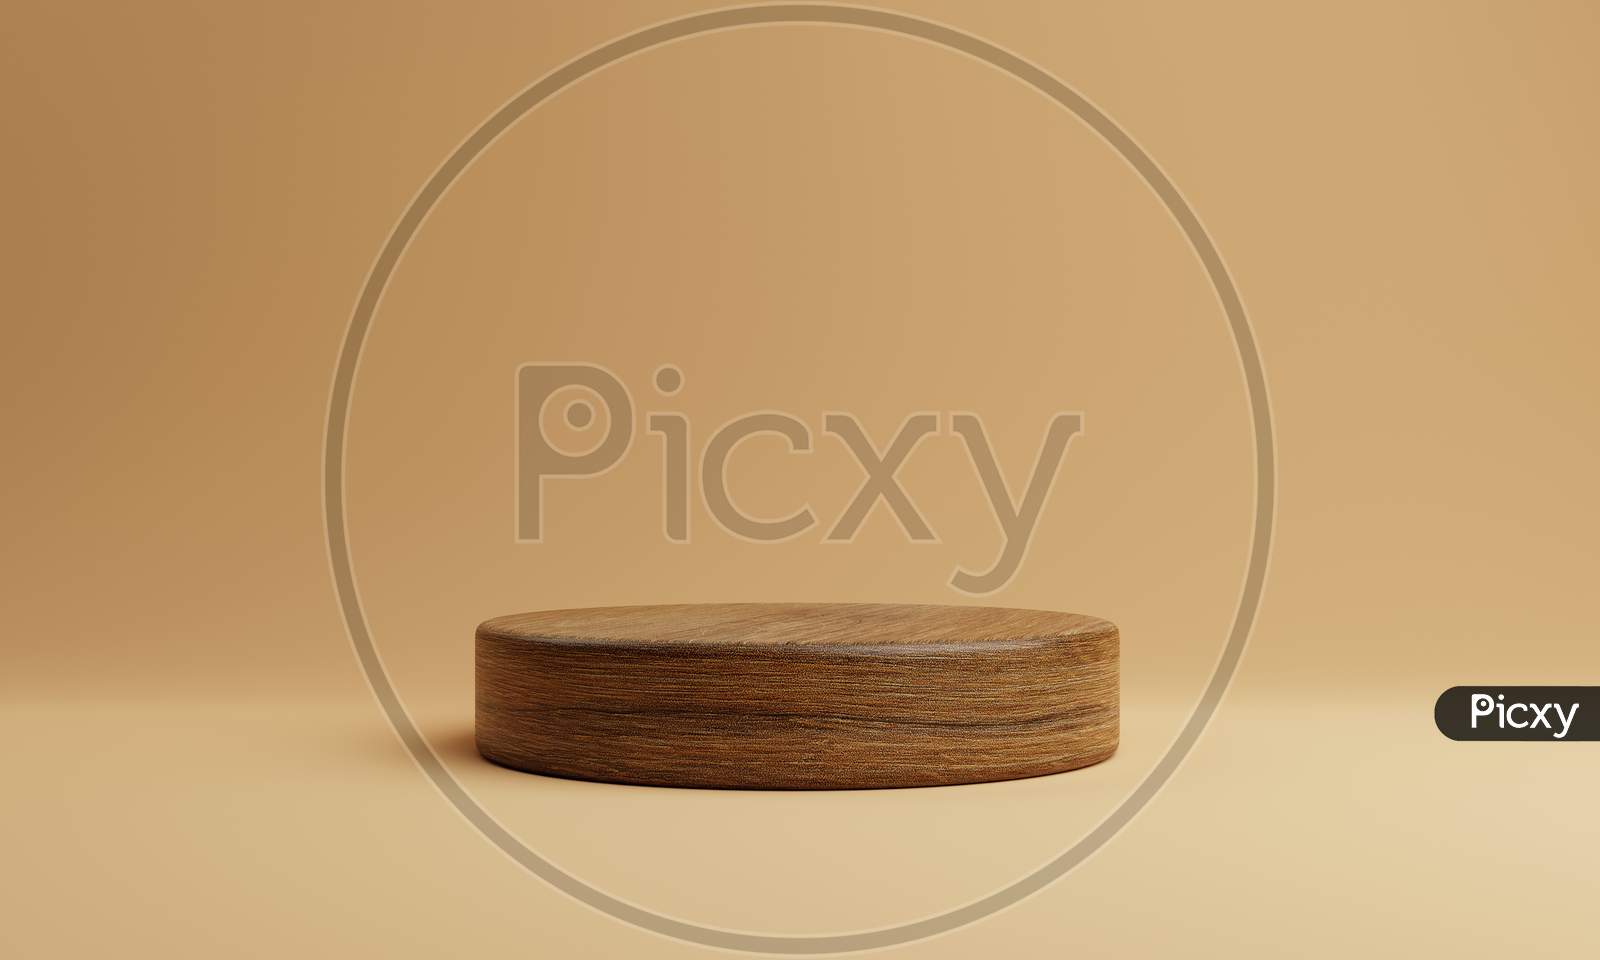 One Brown Wooden Round Cylinder Product Stage Podium On Orange Background. Minimal Fashion Theme. Geometry Exhibition Stage Mockup Concept. 3D Illustration Rendering Graphic Design